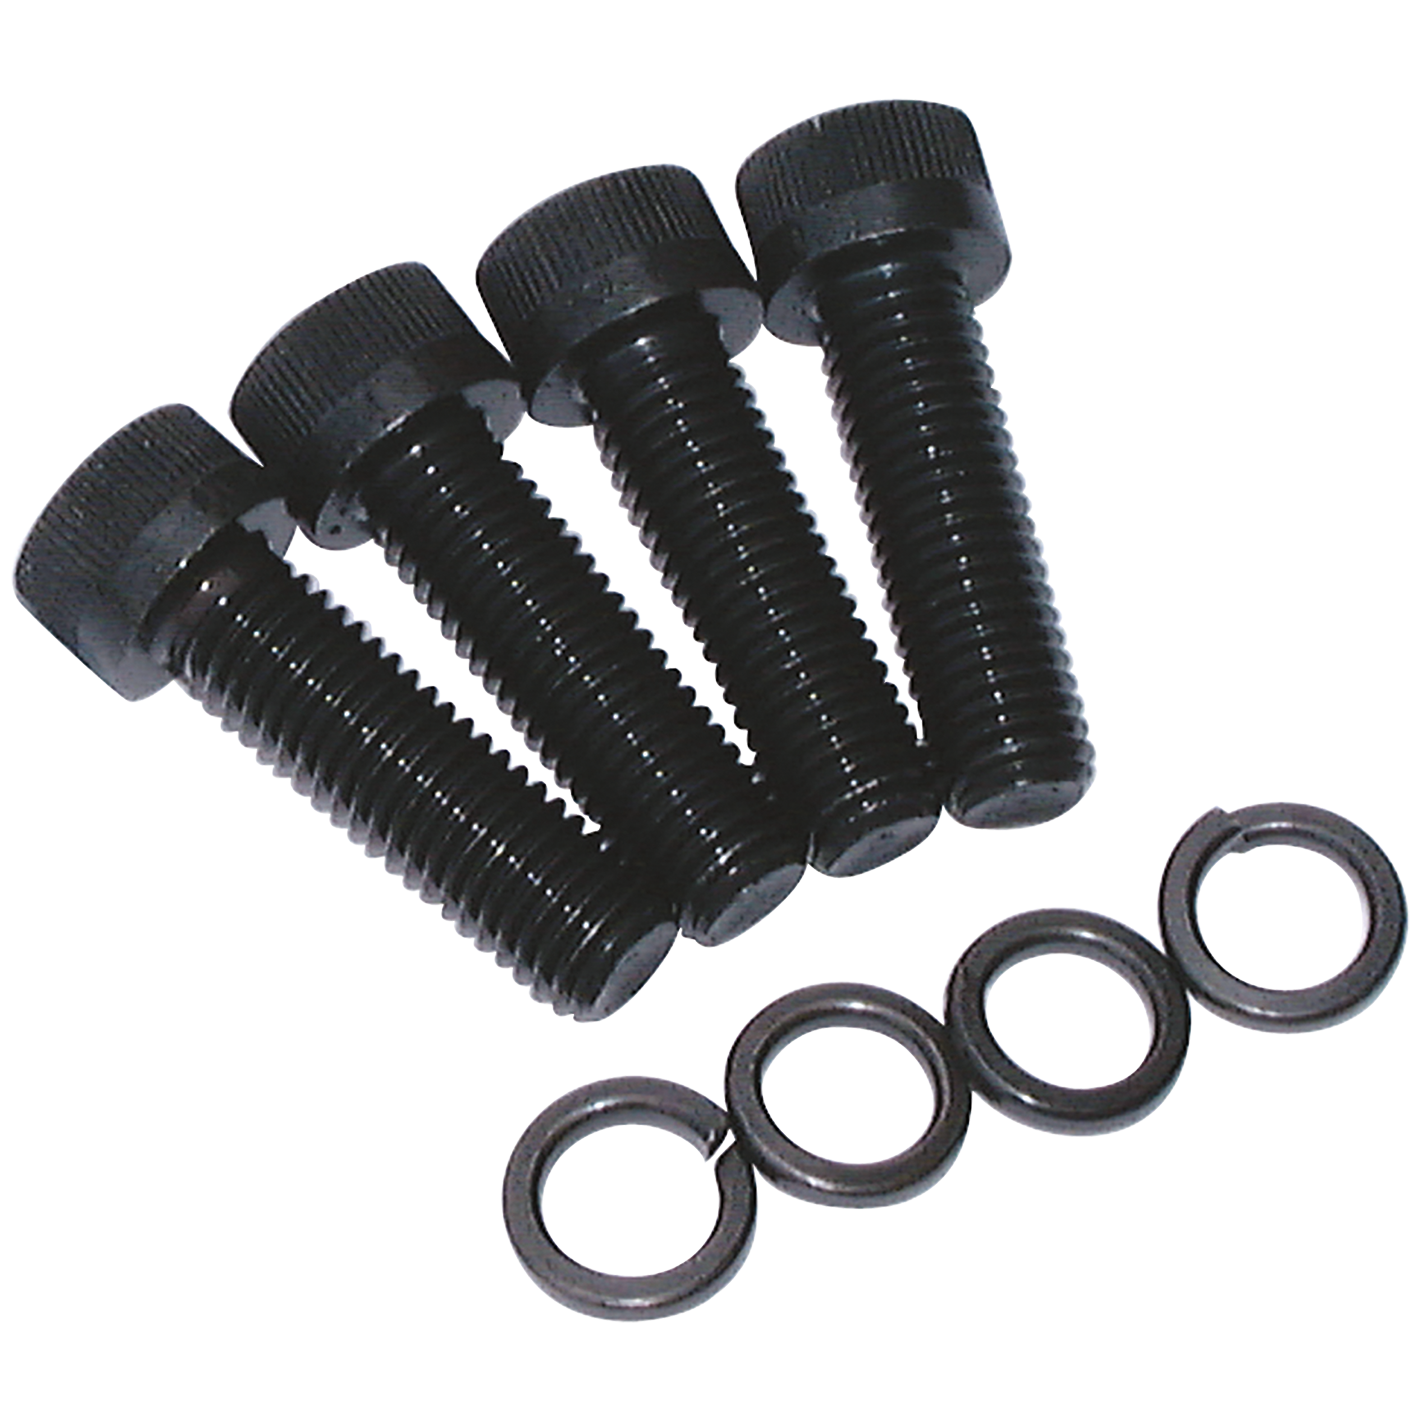 M10X40 BOLTS AND SPRING WASHERS X 4